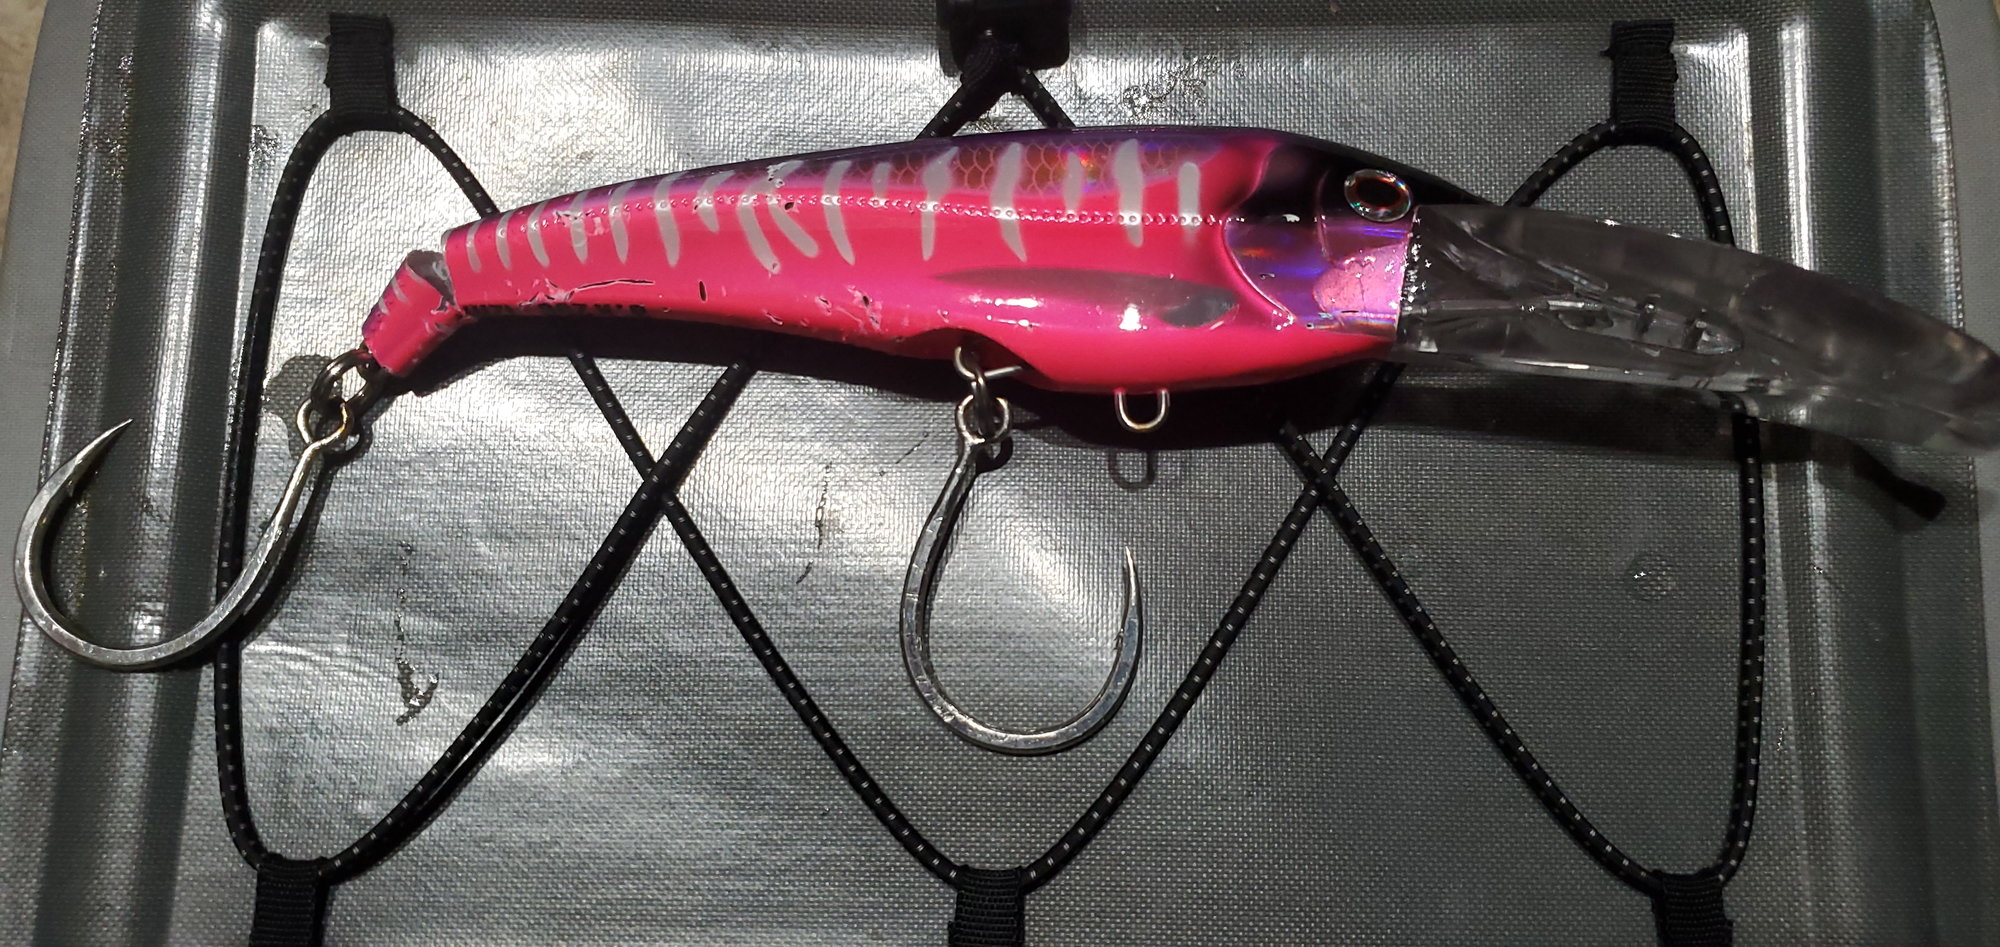 Nomad DTX Minnow review - Page 2 - The Hull Truth - Boating and Fishing  Forum